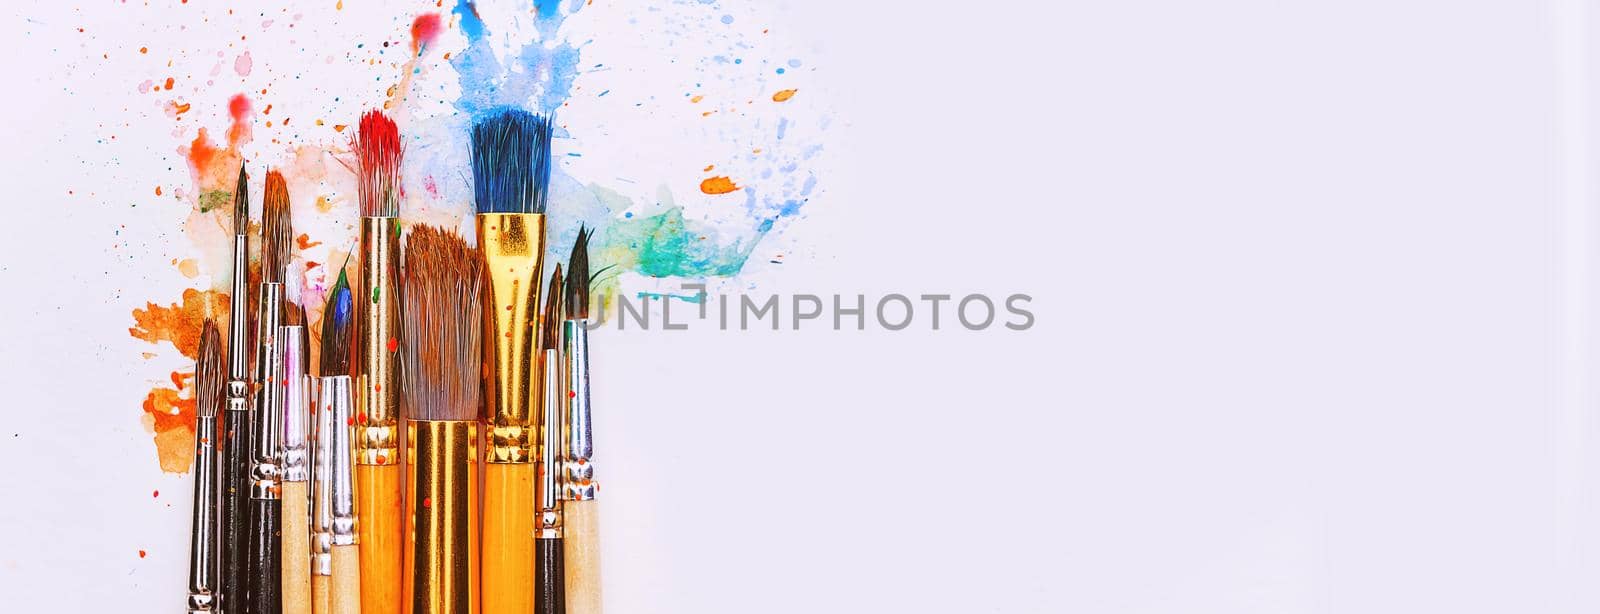 artistic brushes on wooden background